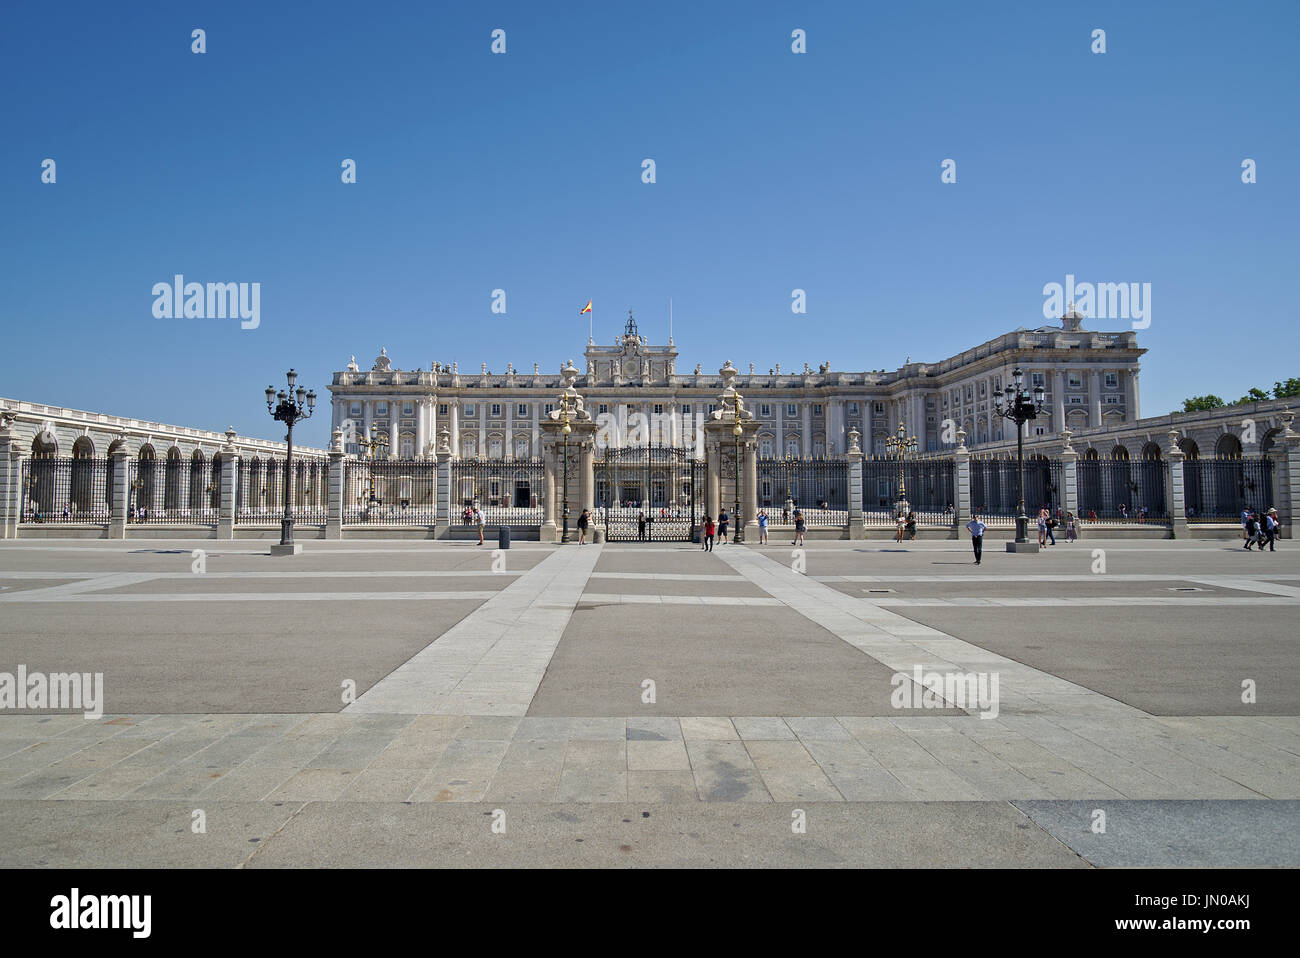 Front view of the Palacio Real (Royal Palace) in Madrid, Spain, in a very sunny day with absolutely no clouds. Stock Photo